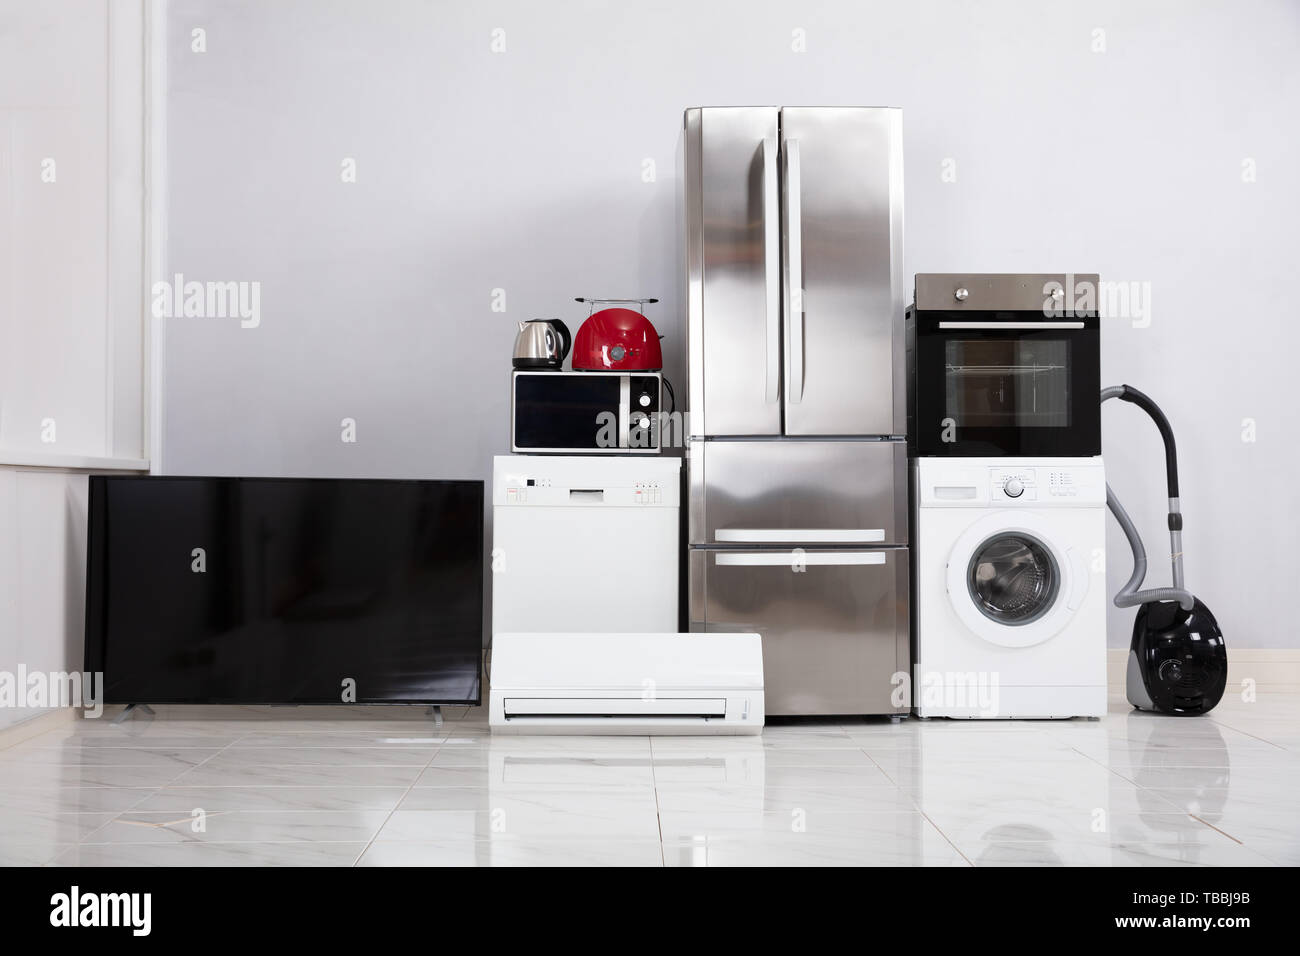 Modern Kitchen Appliances Washing High Resolution Stock Photography And Images Alamy